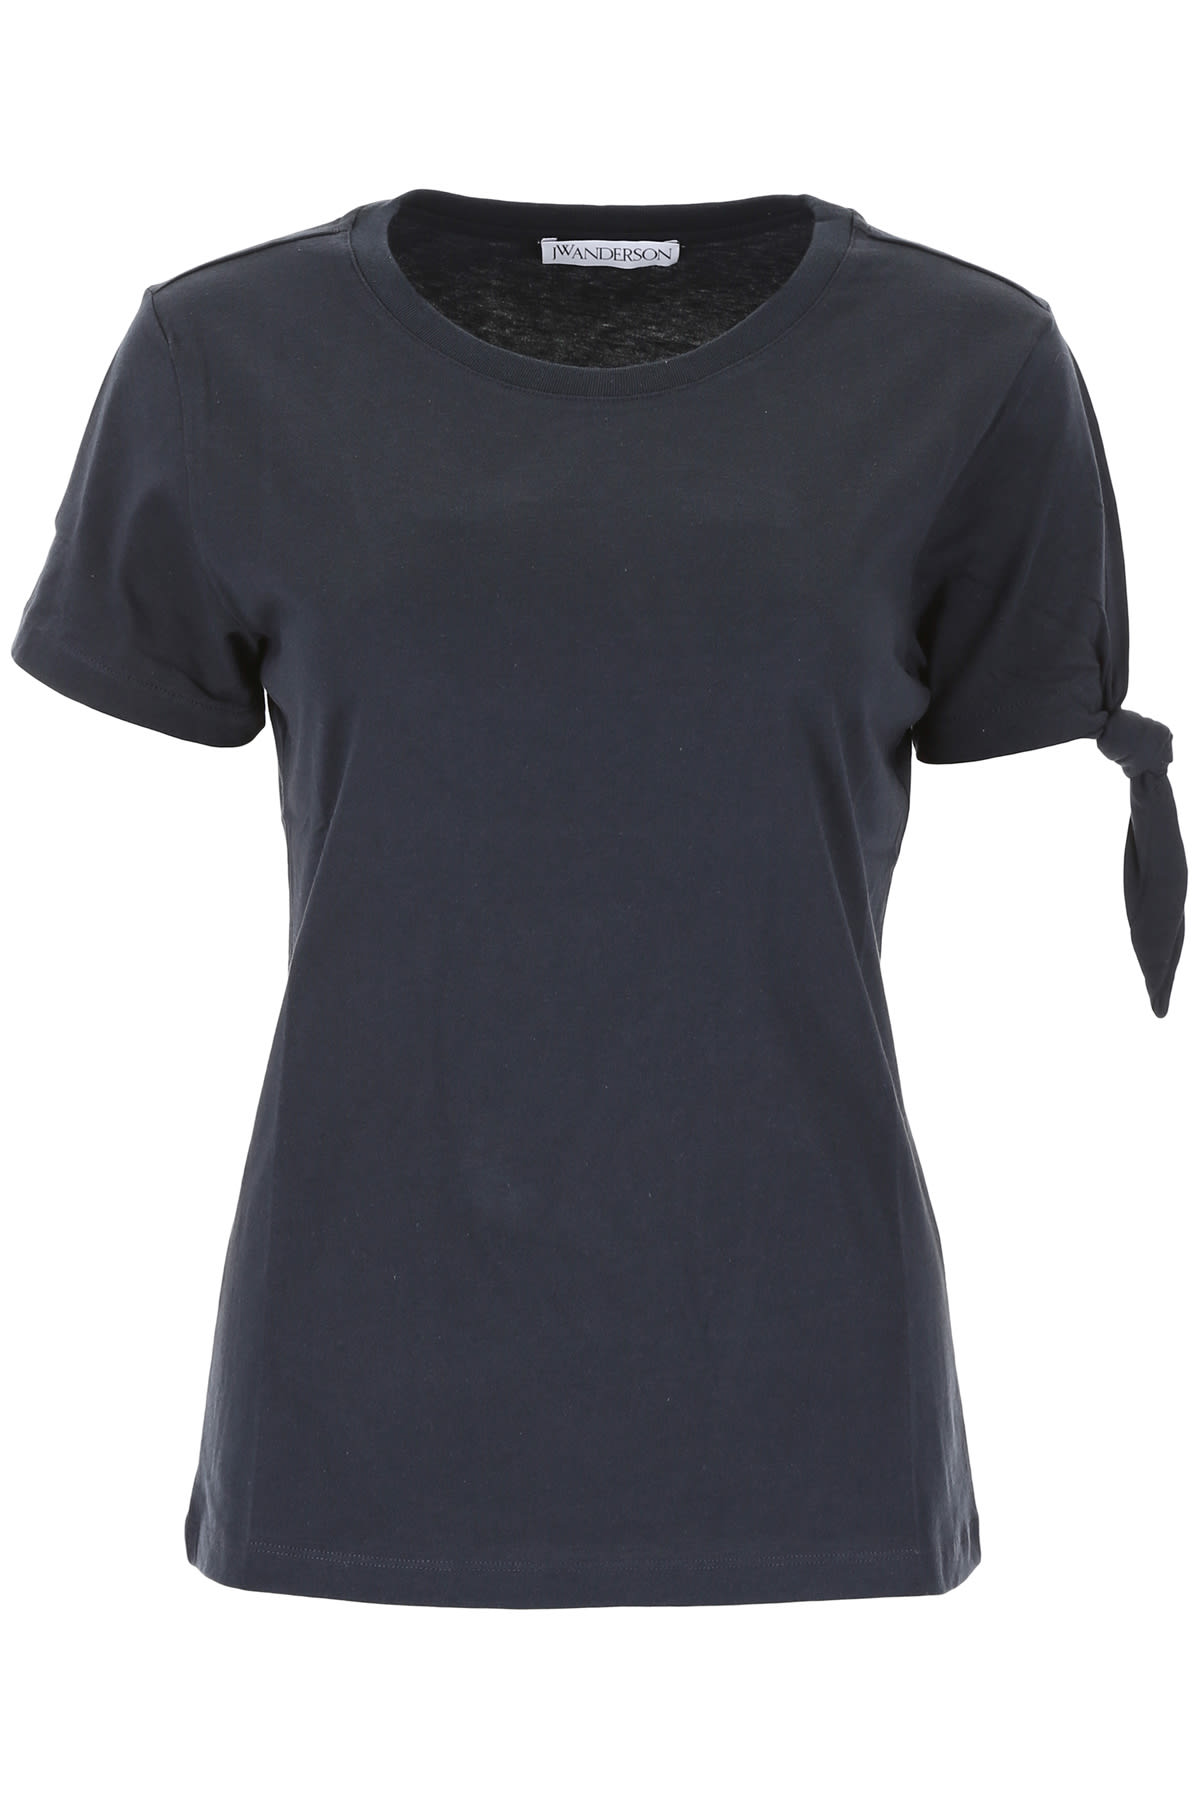 J.W. Anderson J.W. Anderson Single Knot T-shirt - NAVY OFF WHITE (Blue ...